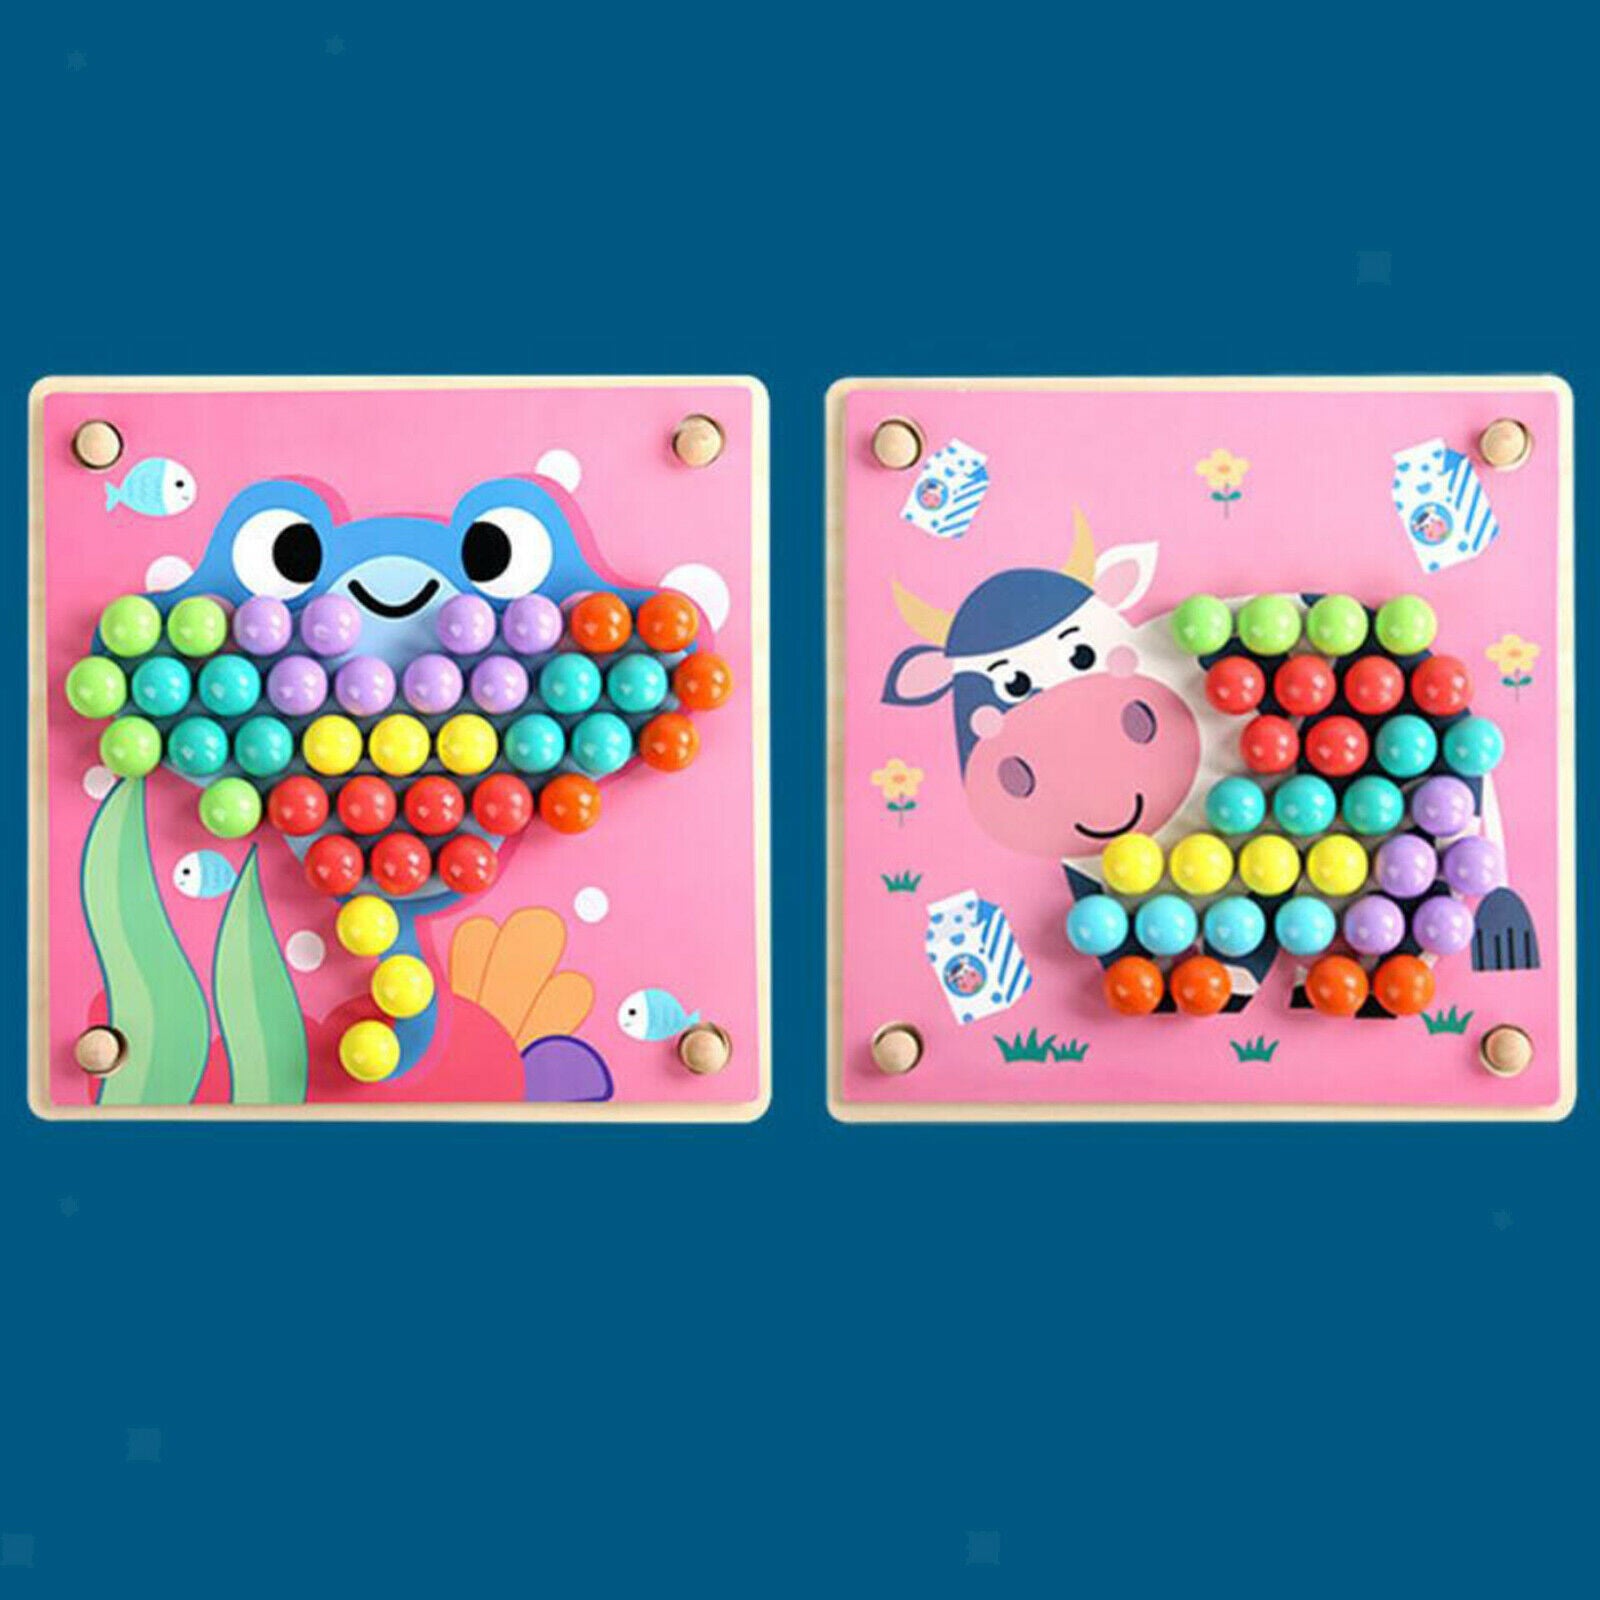 Puzzle Kids Wood Beads Game Go Games Board Learn Children Toys Boy Girl